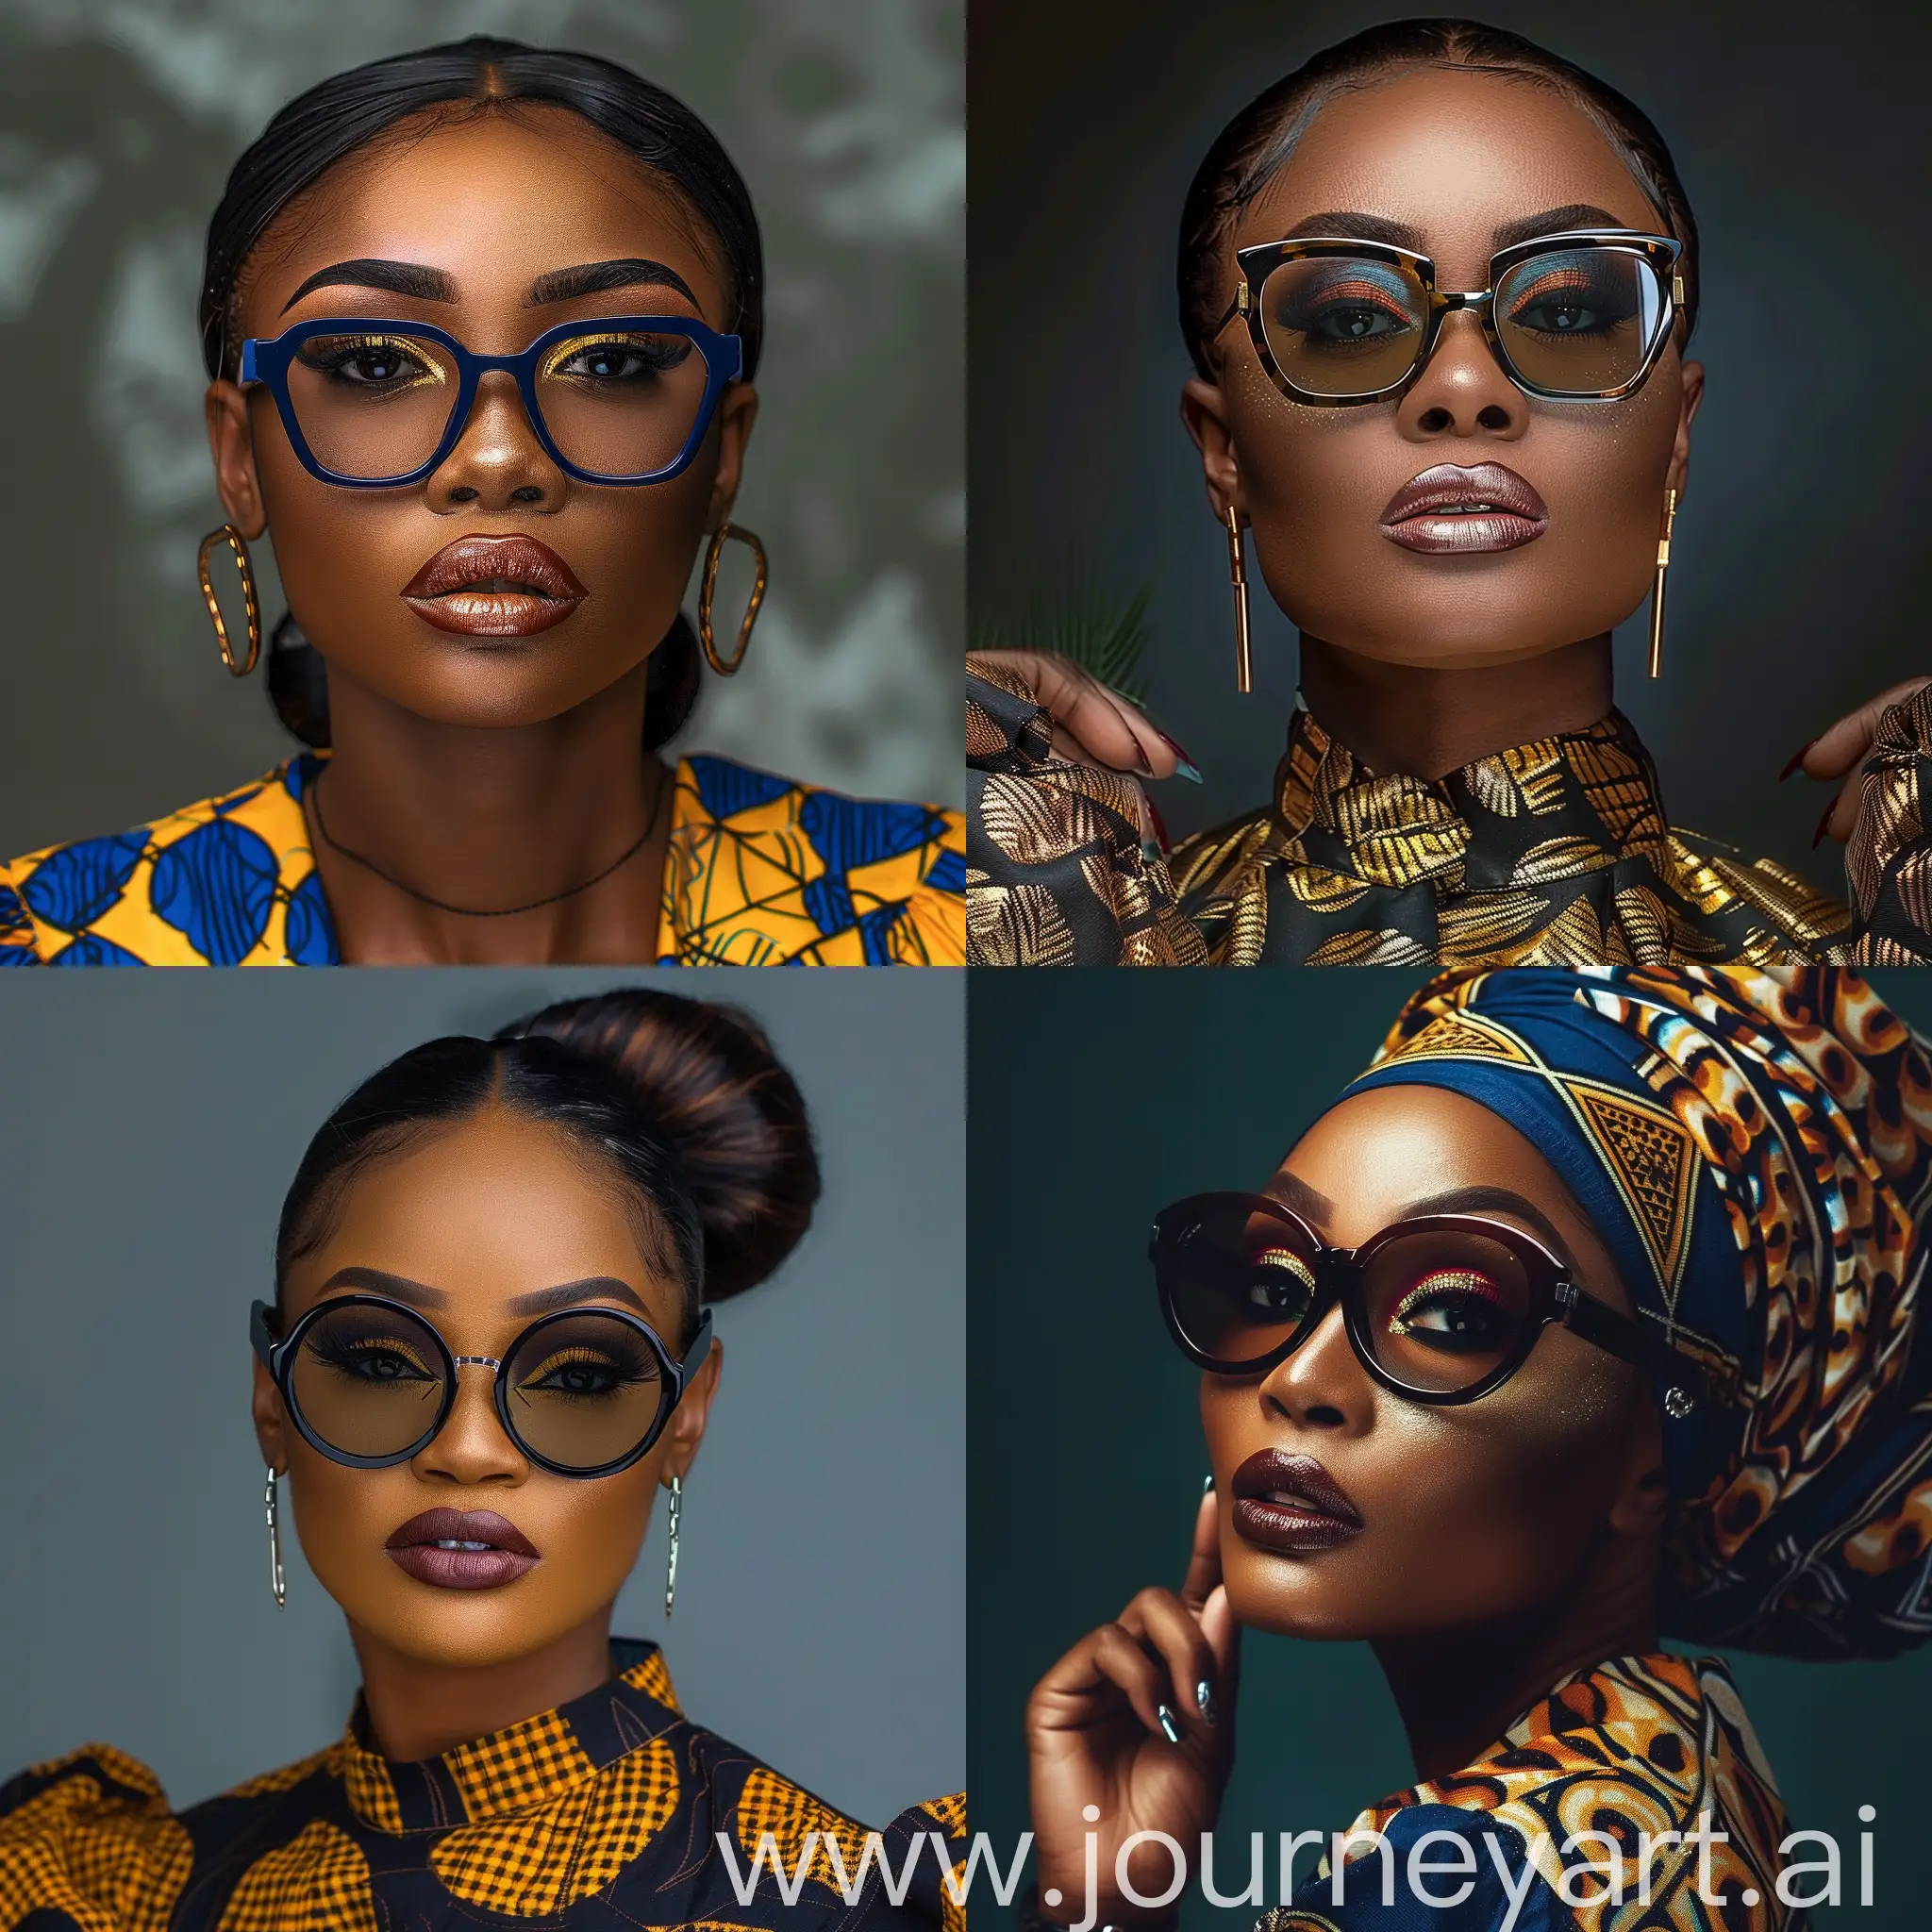 a portrait of a Nigerian lady with makeup and dark eye glasses